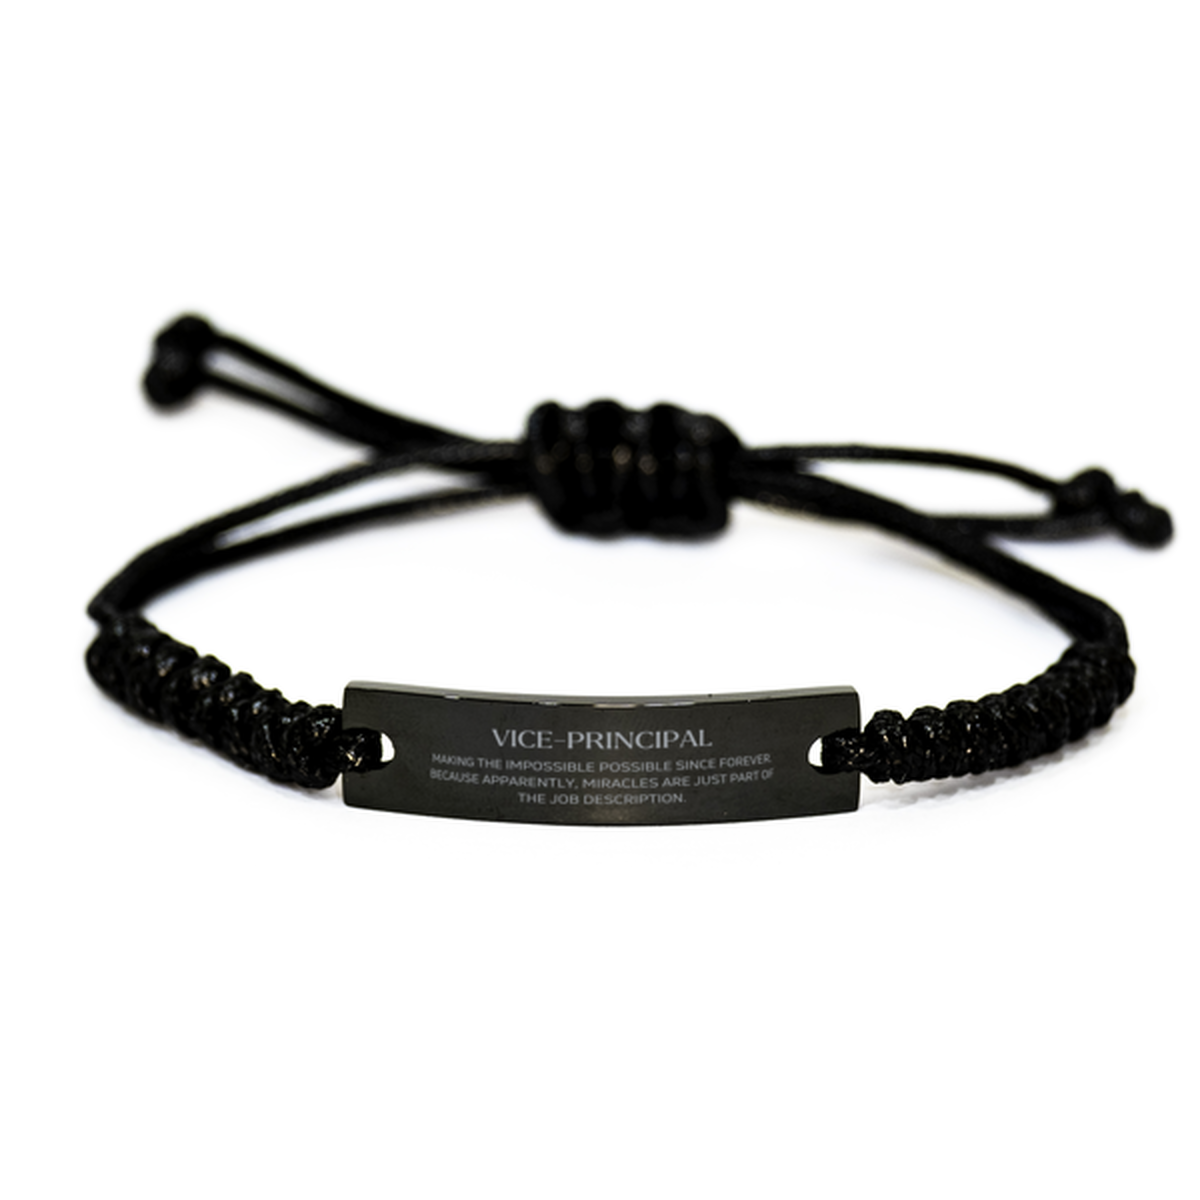 Funny Vice-principal Gifts, Miracles are just part of the job description, Inspirational Birthday Black Rope Bracelet For Vice-principal, Men, Women, Coworkers, Friends, Boss